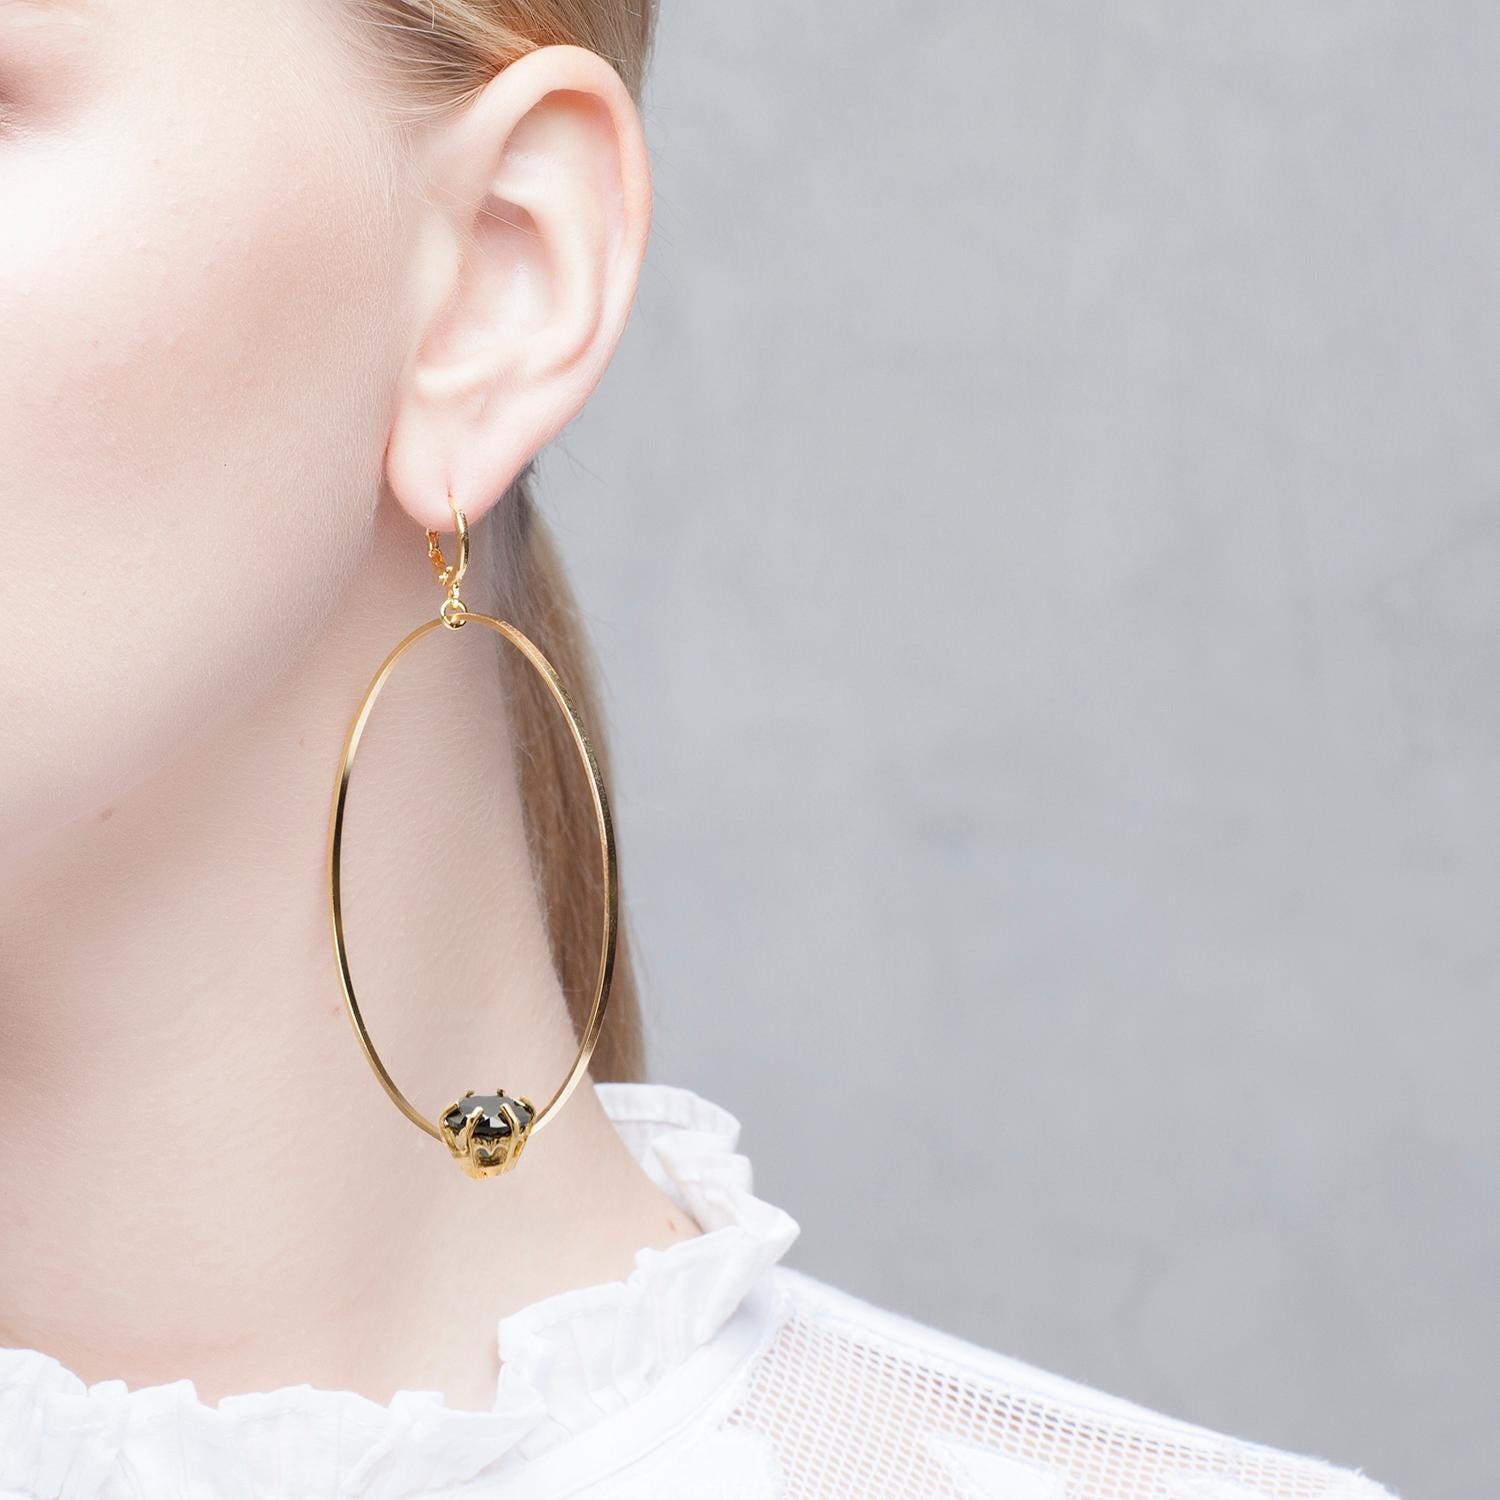 Puro Iosselliani presents its iconic creole big hoop earrings. Made in 18 Karat gold plated silver, the big hoops float effortlessly by a lever back vintage hook. A reversed black round zircon embellishes the hoop for extra shimmering. 6,5 cm